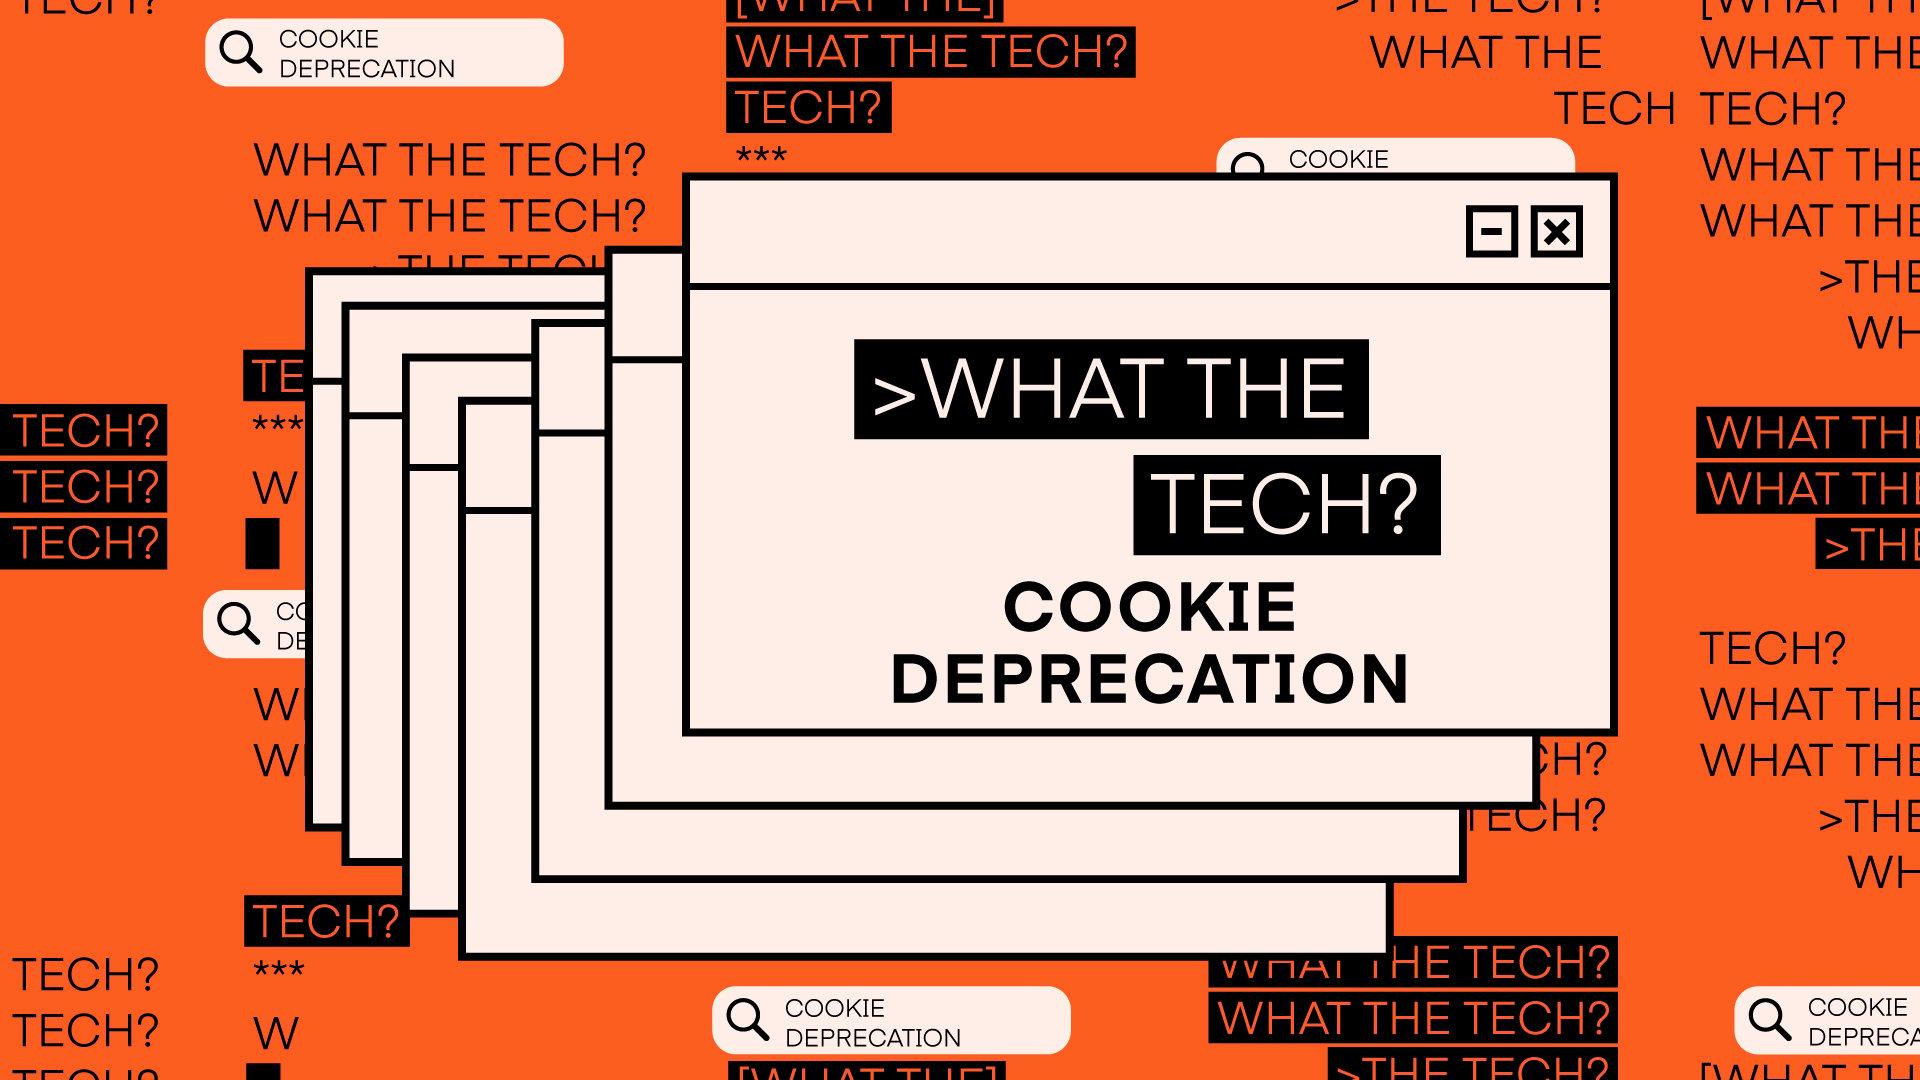 What the Tech is cookie deprecation?